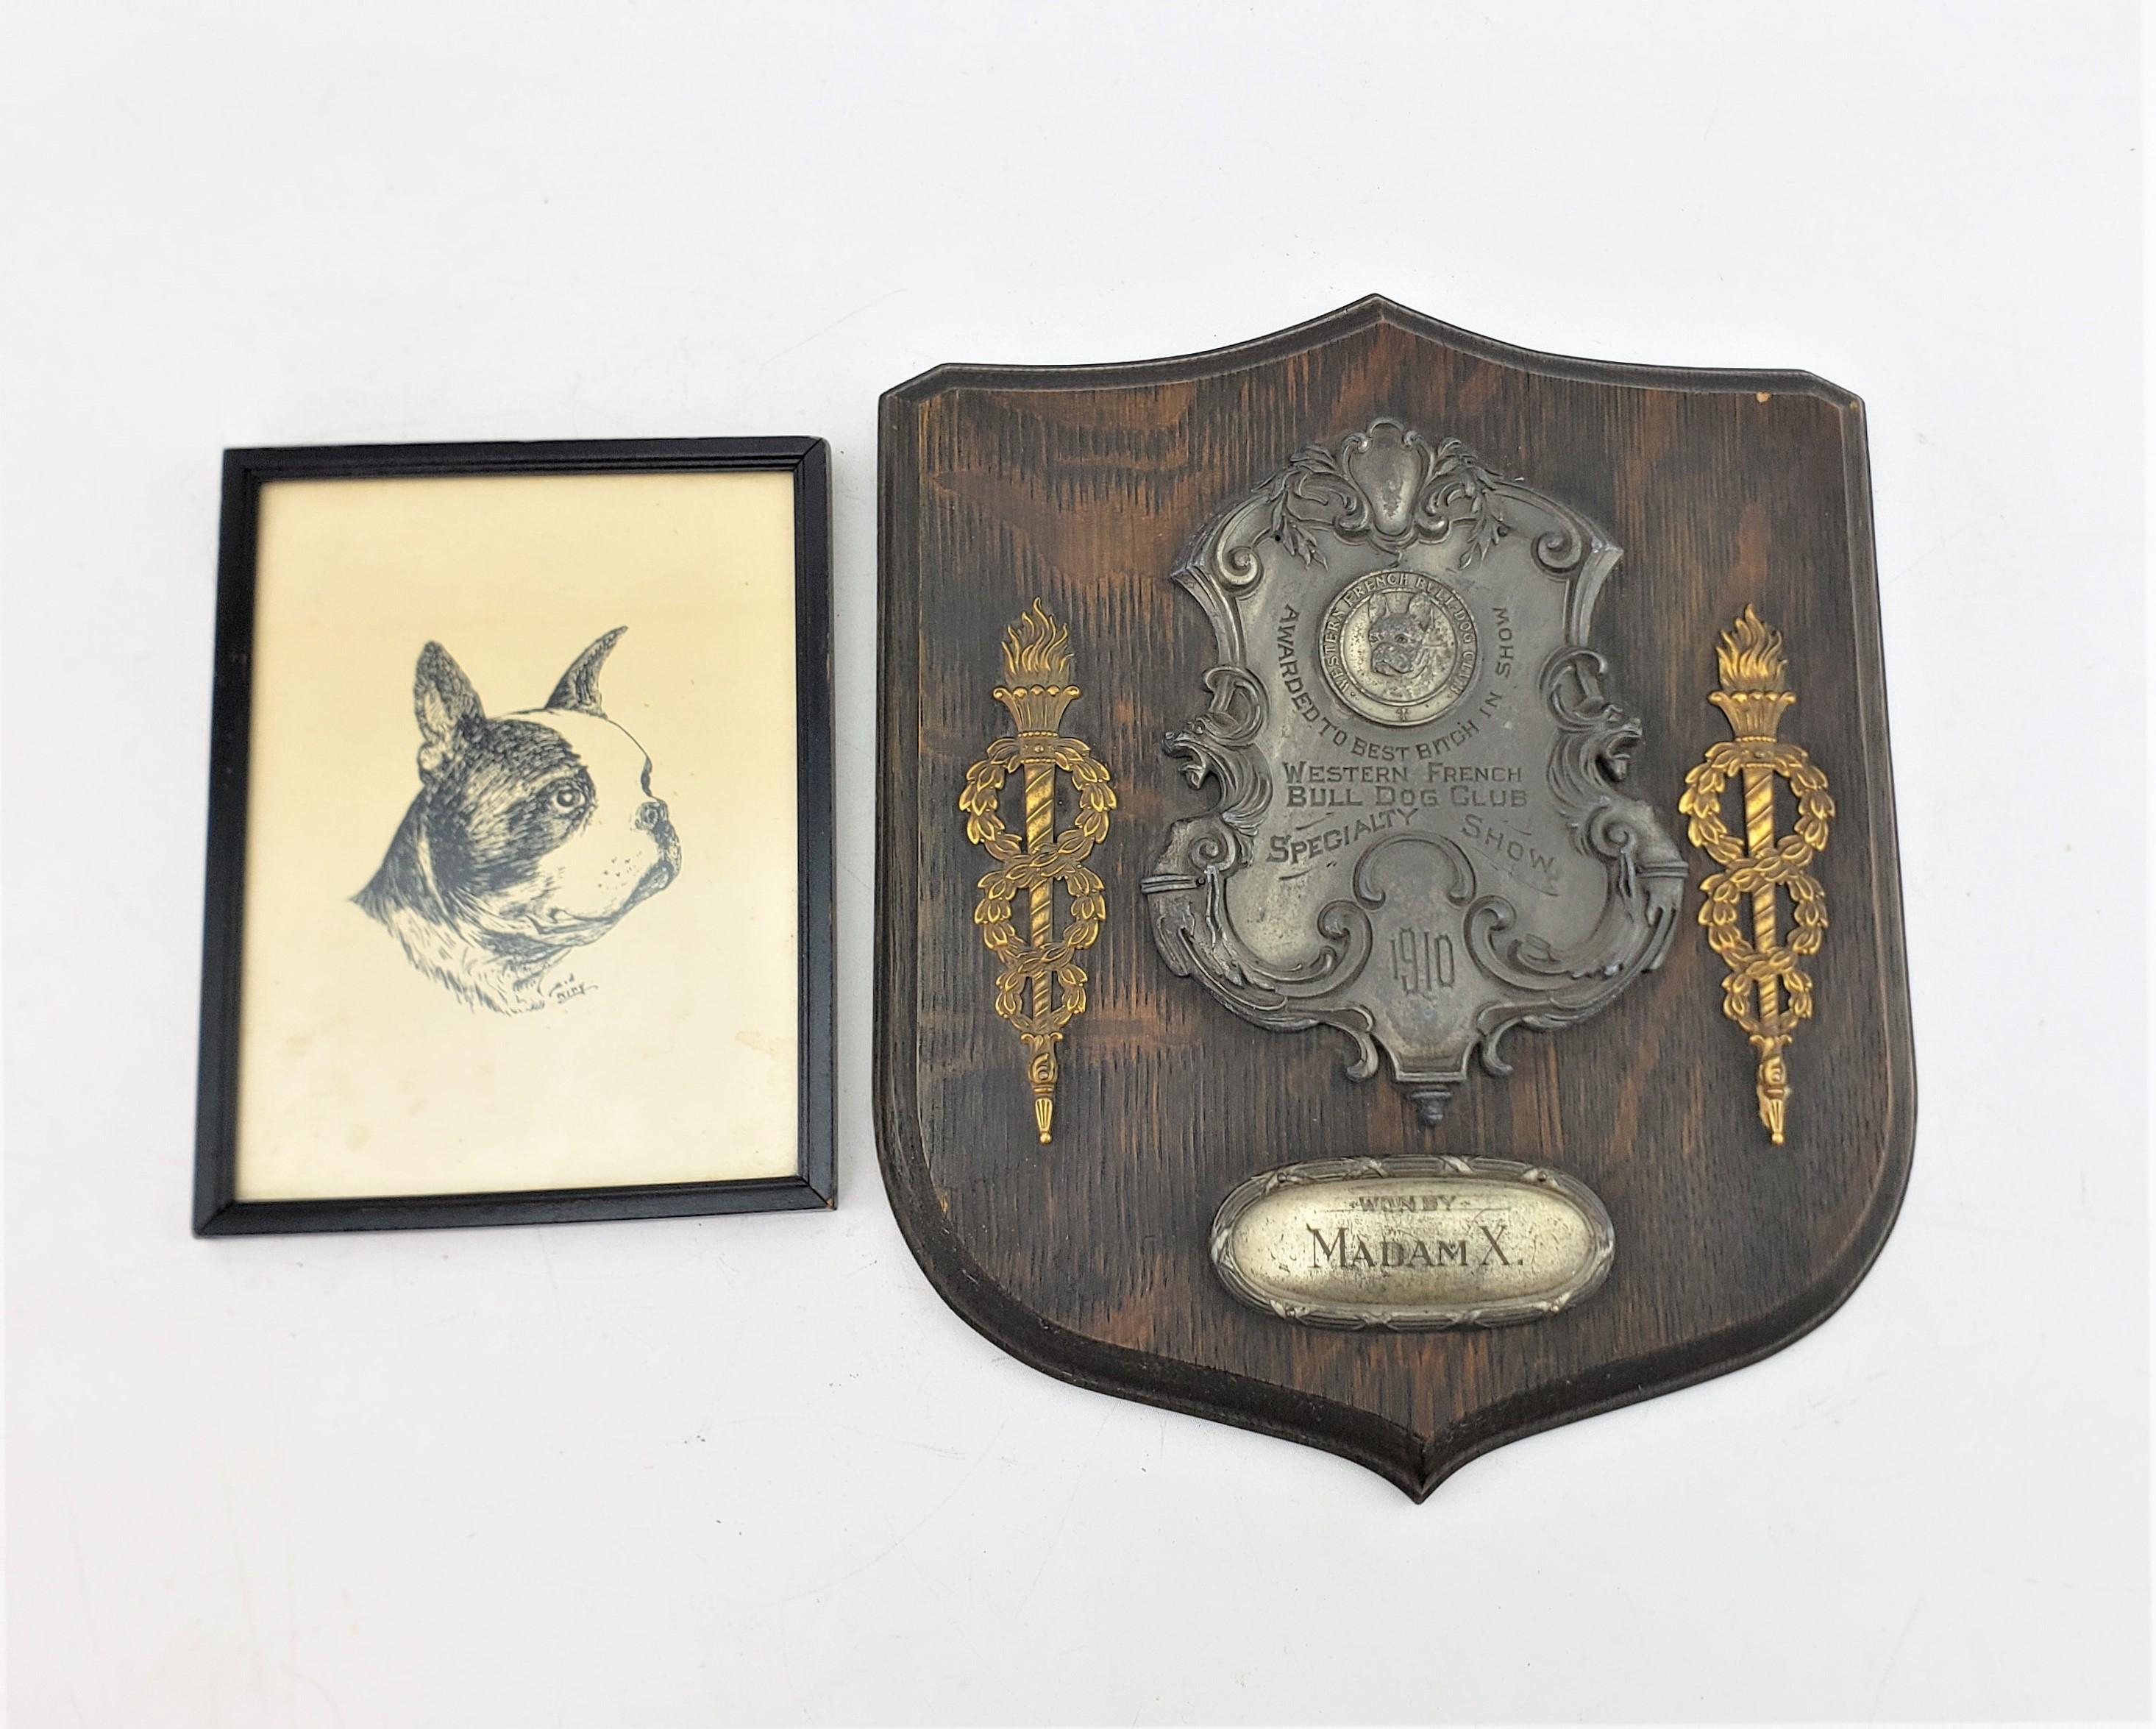 This grouping dates to approximately 1910 and is composed of an award plaque presented to 